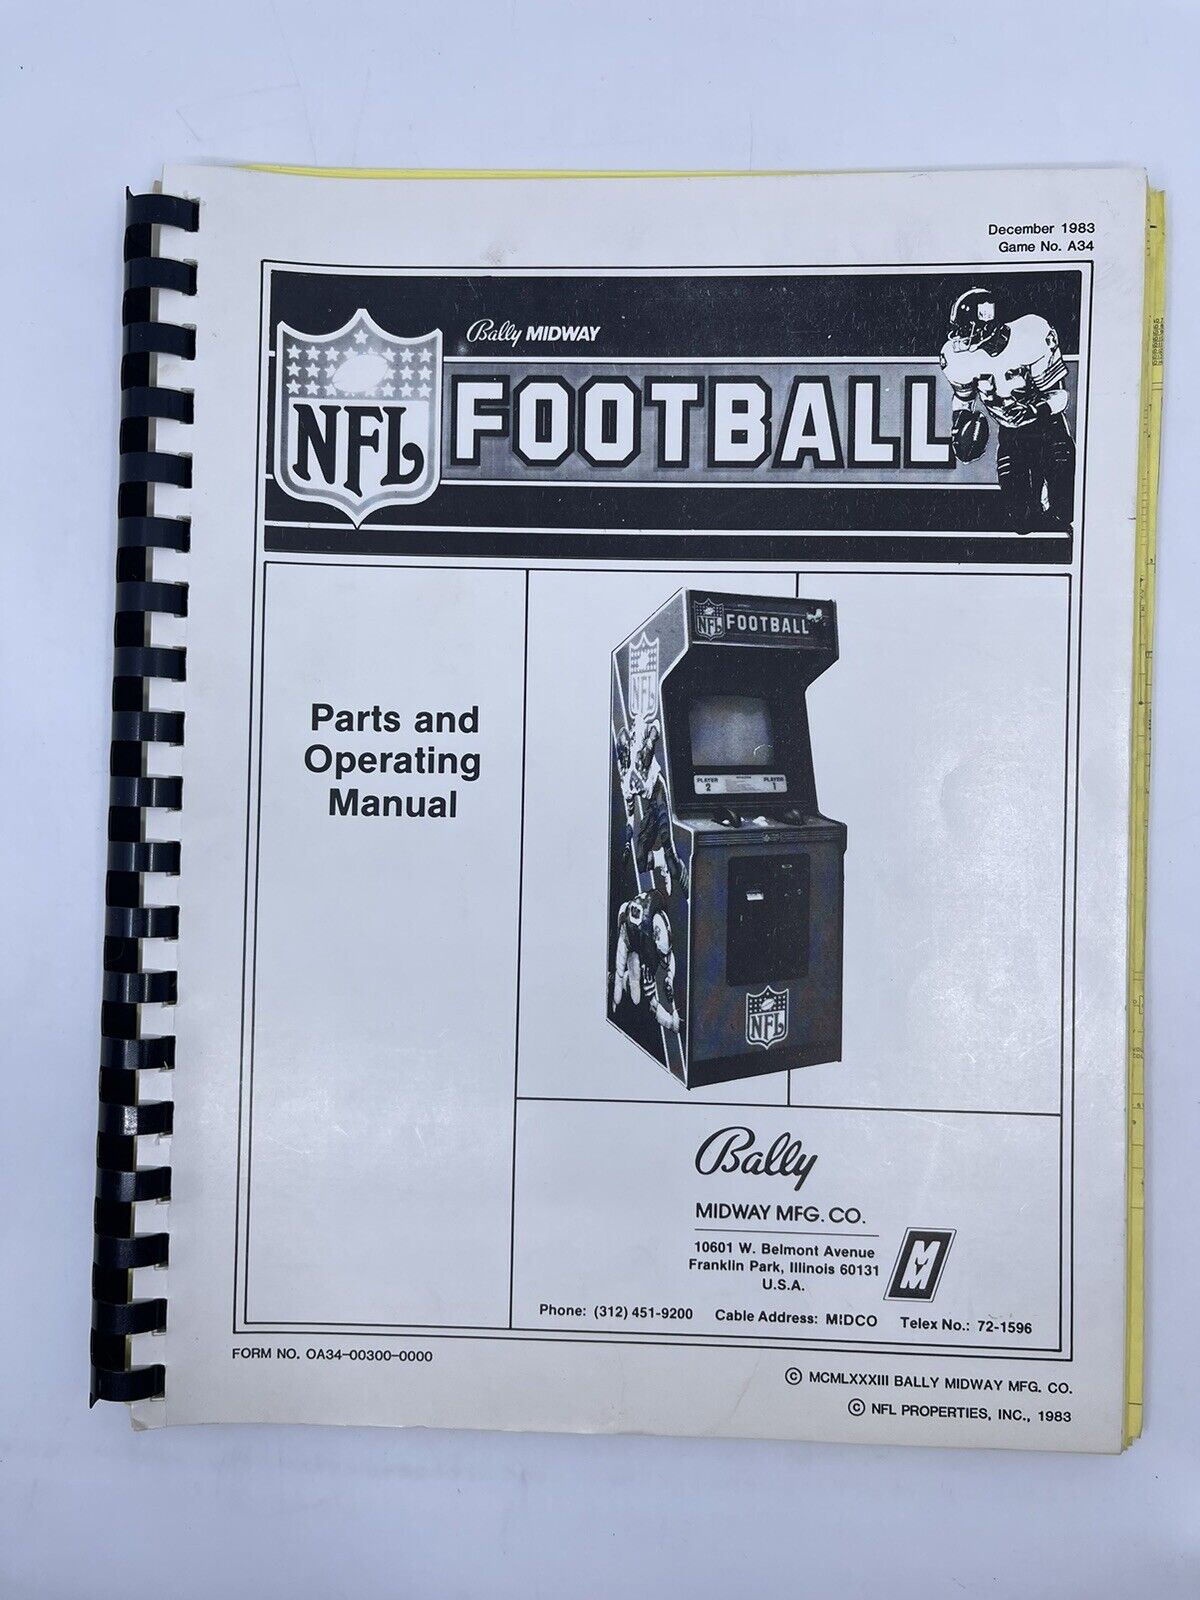 Bally Midway NFL Football Arcade Game Parts and Operating Manual